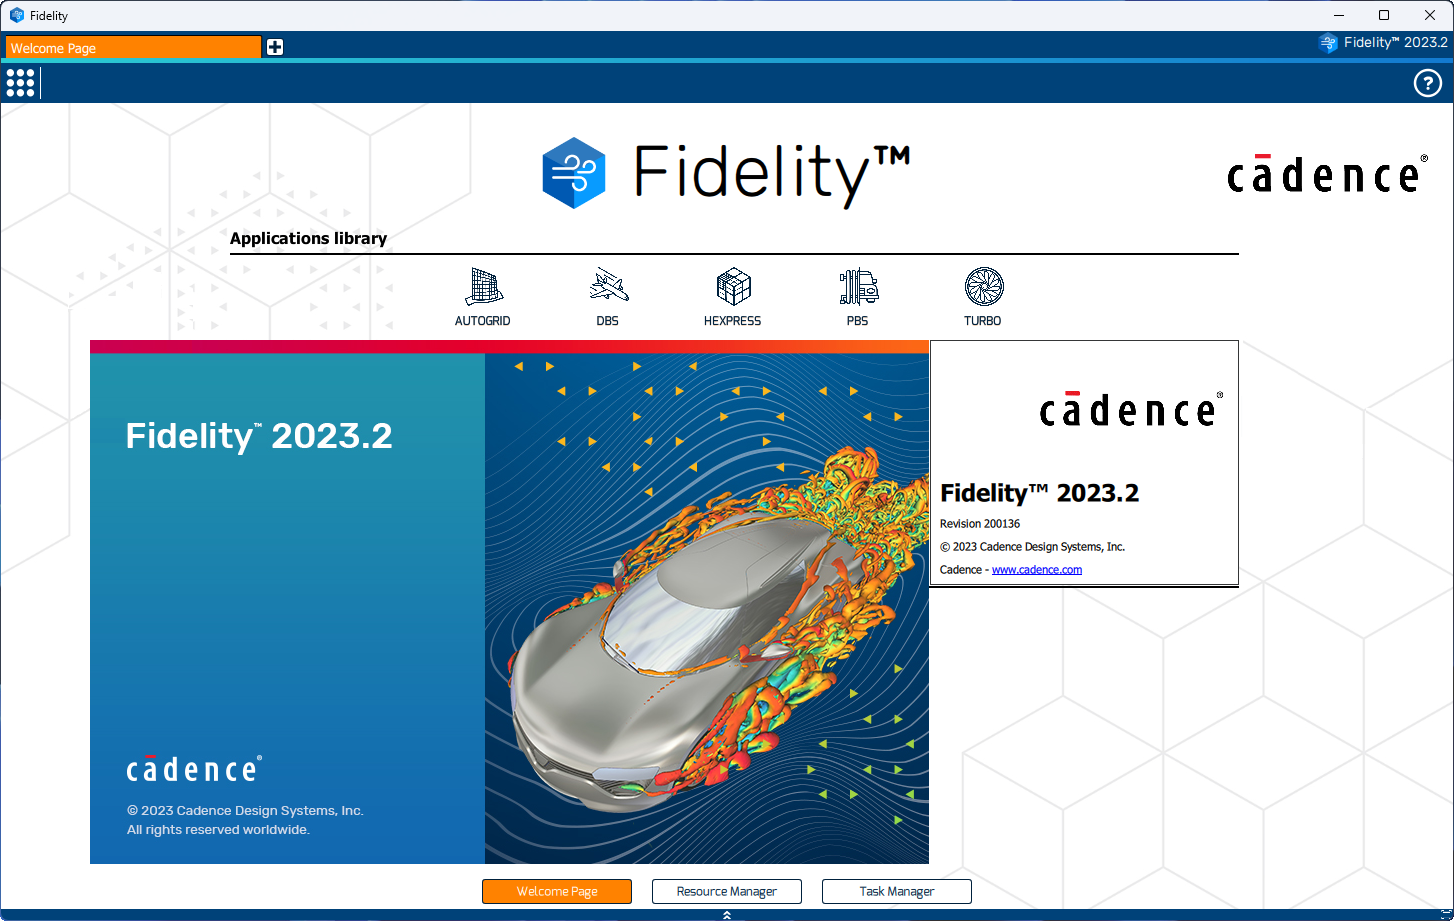 Working with Cadence FIDELITY 2023.2 full license